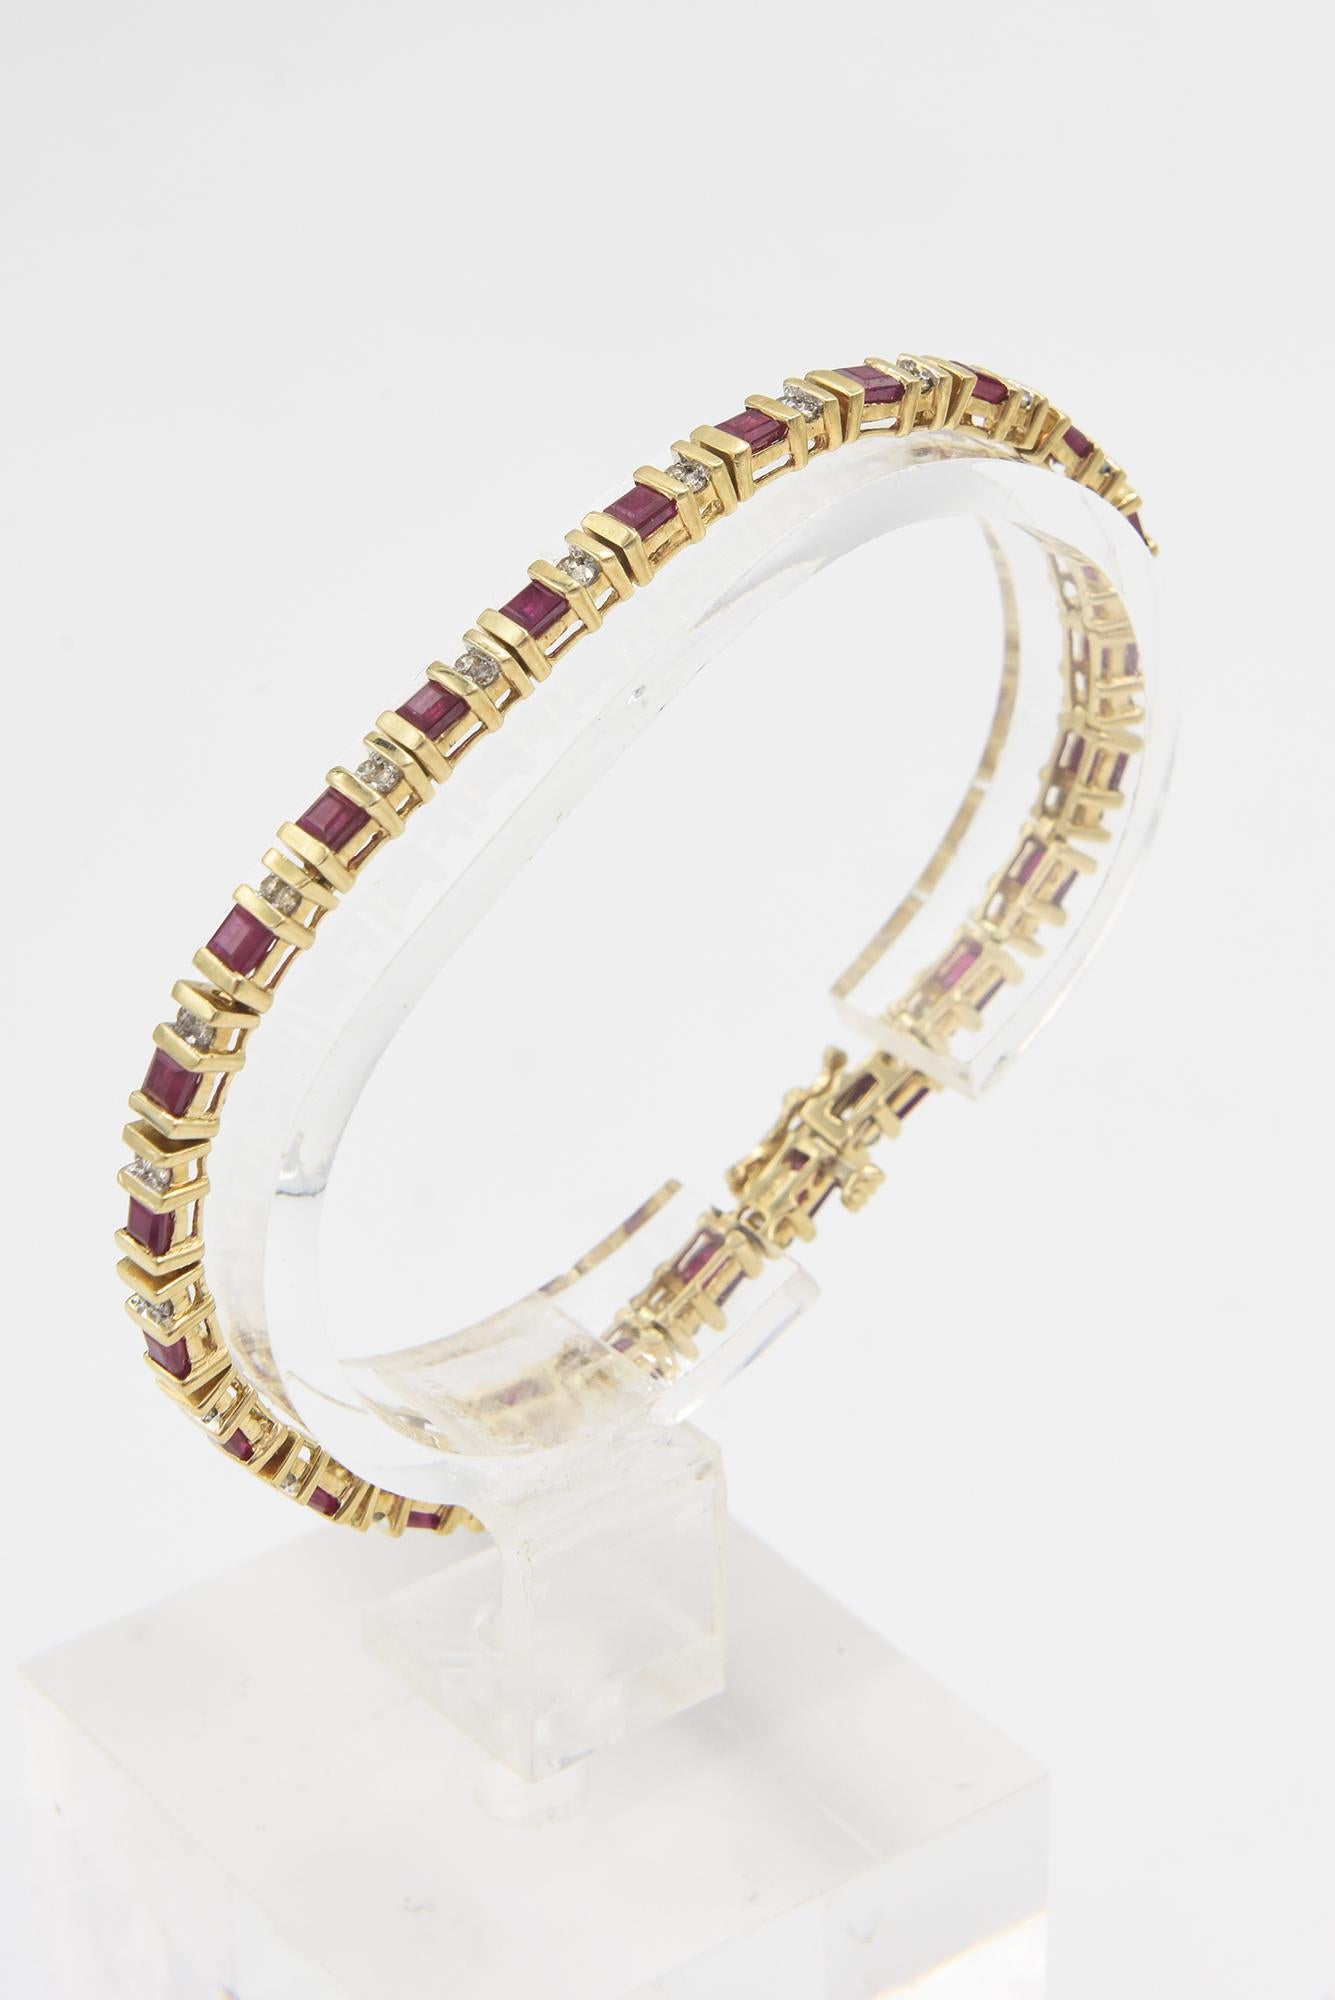 Ruby and Diamond Yellow Gold Tennis Line Bracelet In Good Condition For Sale In Miami Beach, FL